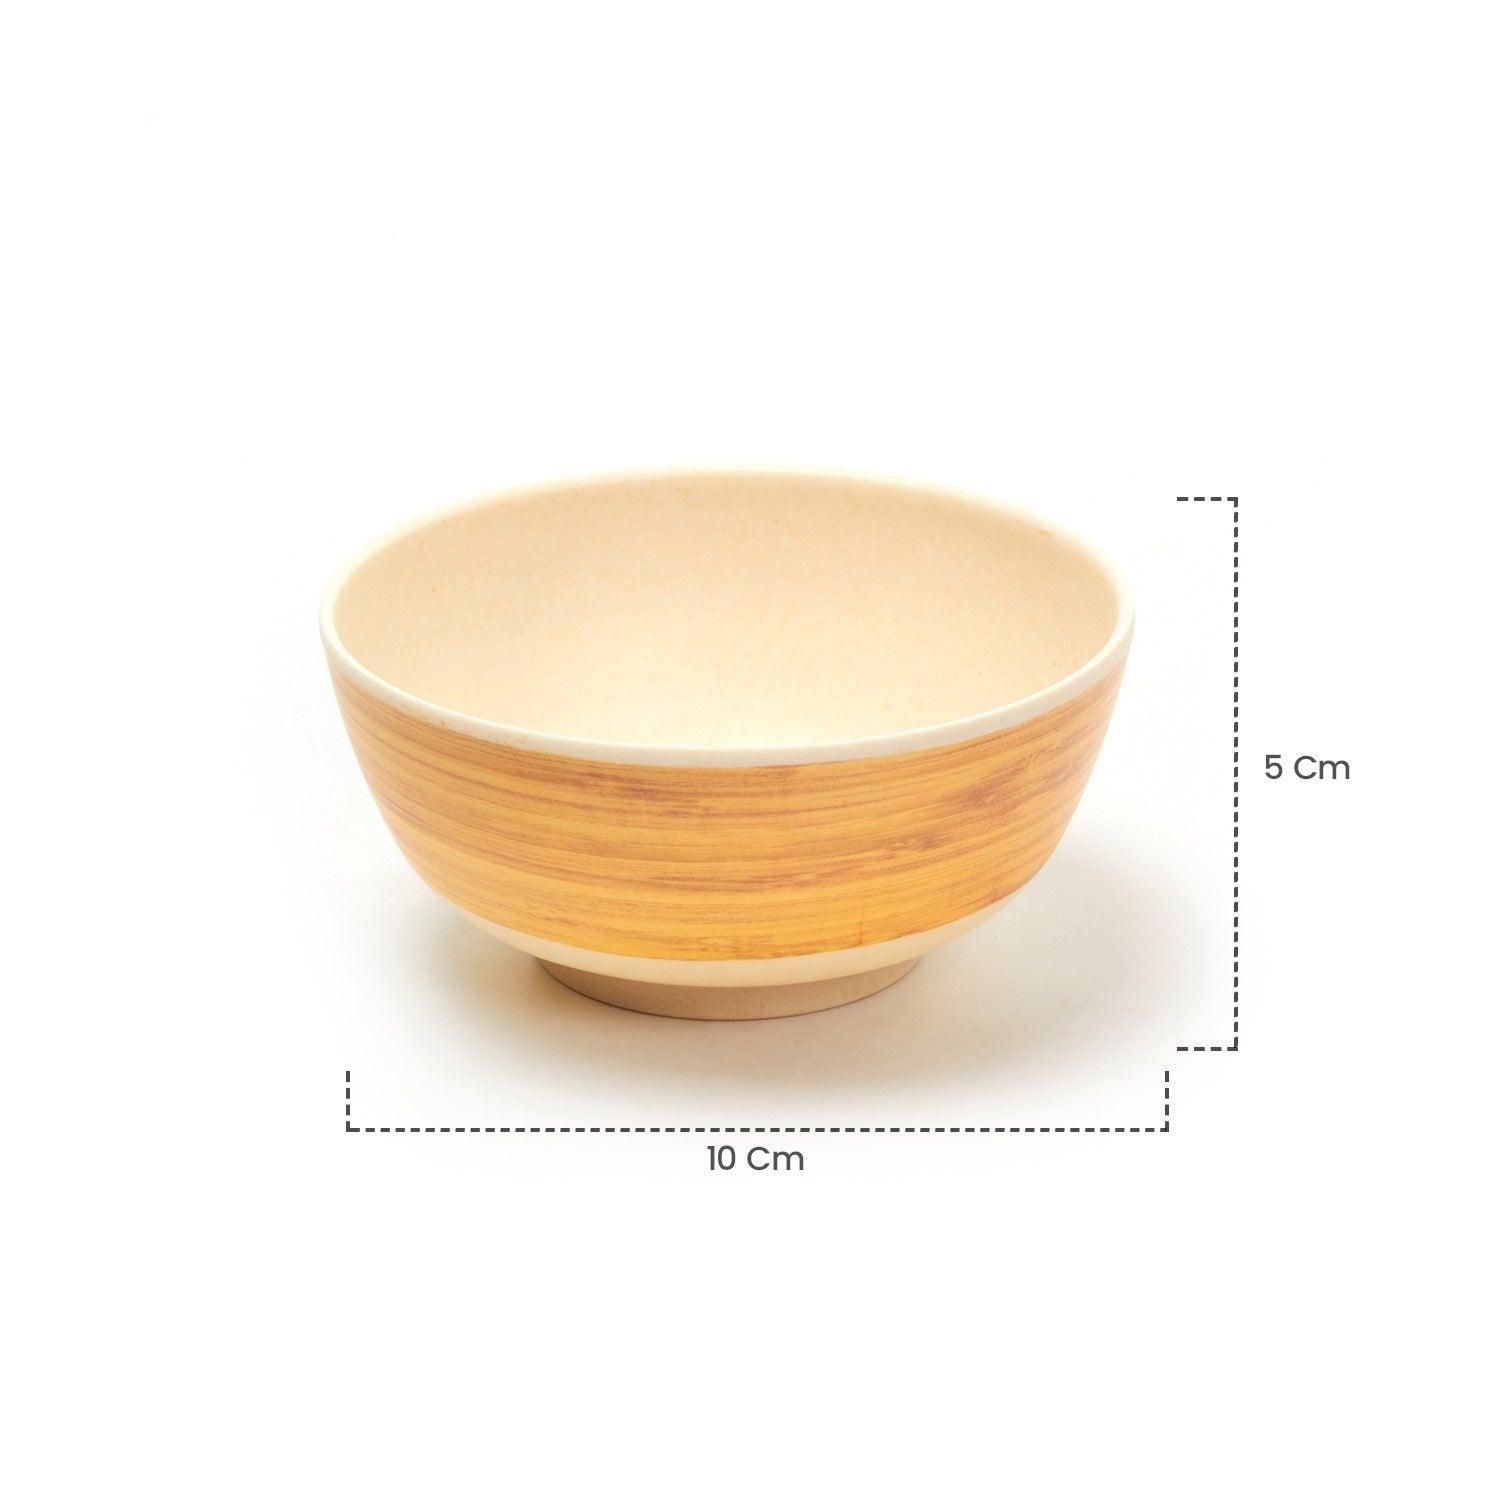 Red Butler Bowls Bamboo Fibre Bowl 4 inches | 6pcs Set | Wooden Design BB04A4 Daily-Use Eco-Friendly Bamboo Fiber Bowl: Stylish & Sustainable Redbutler